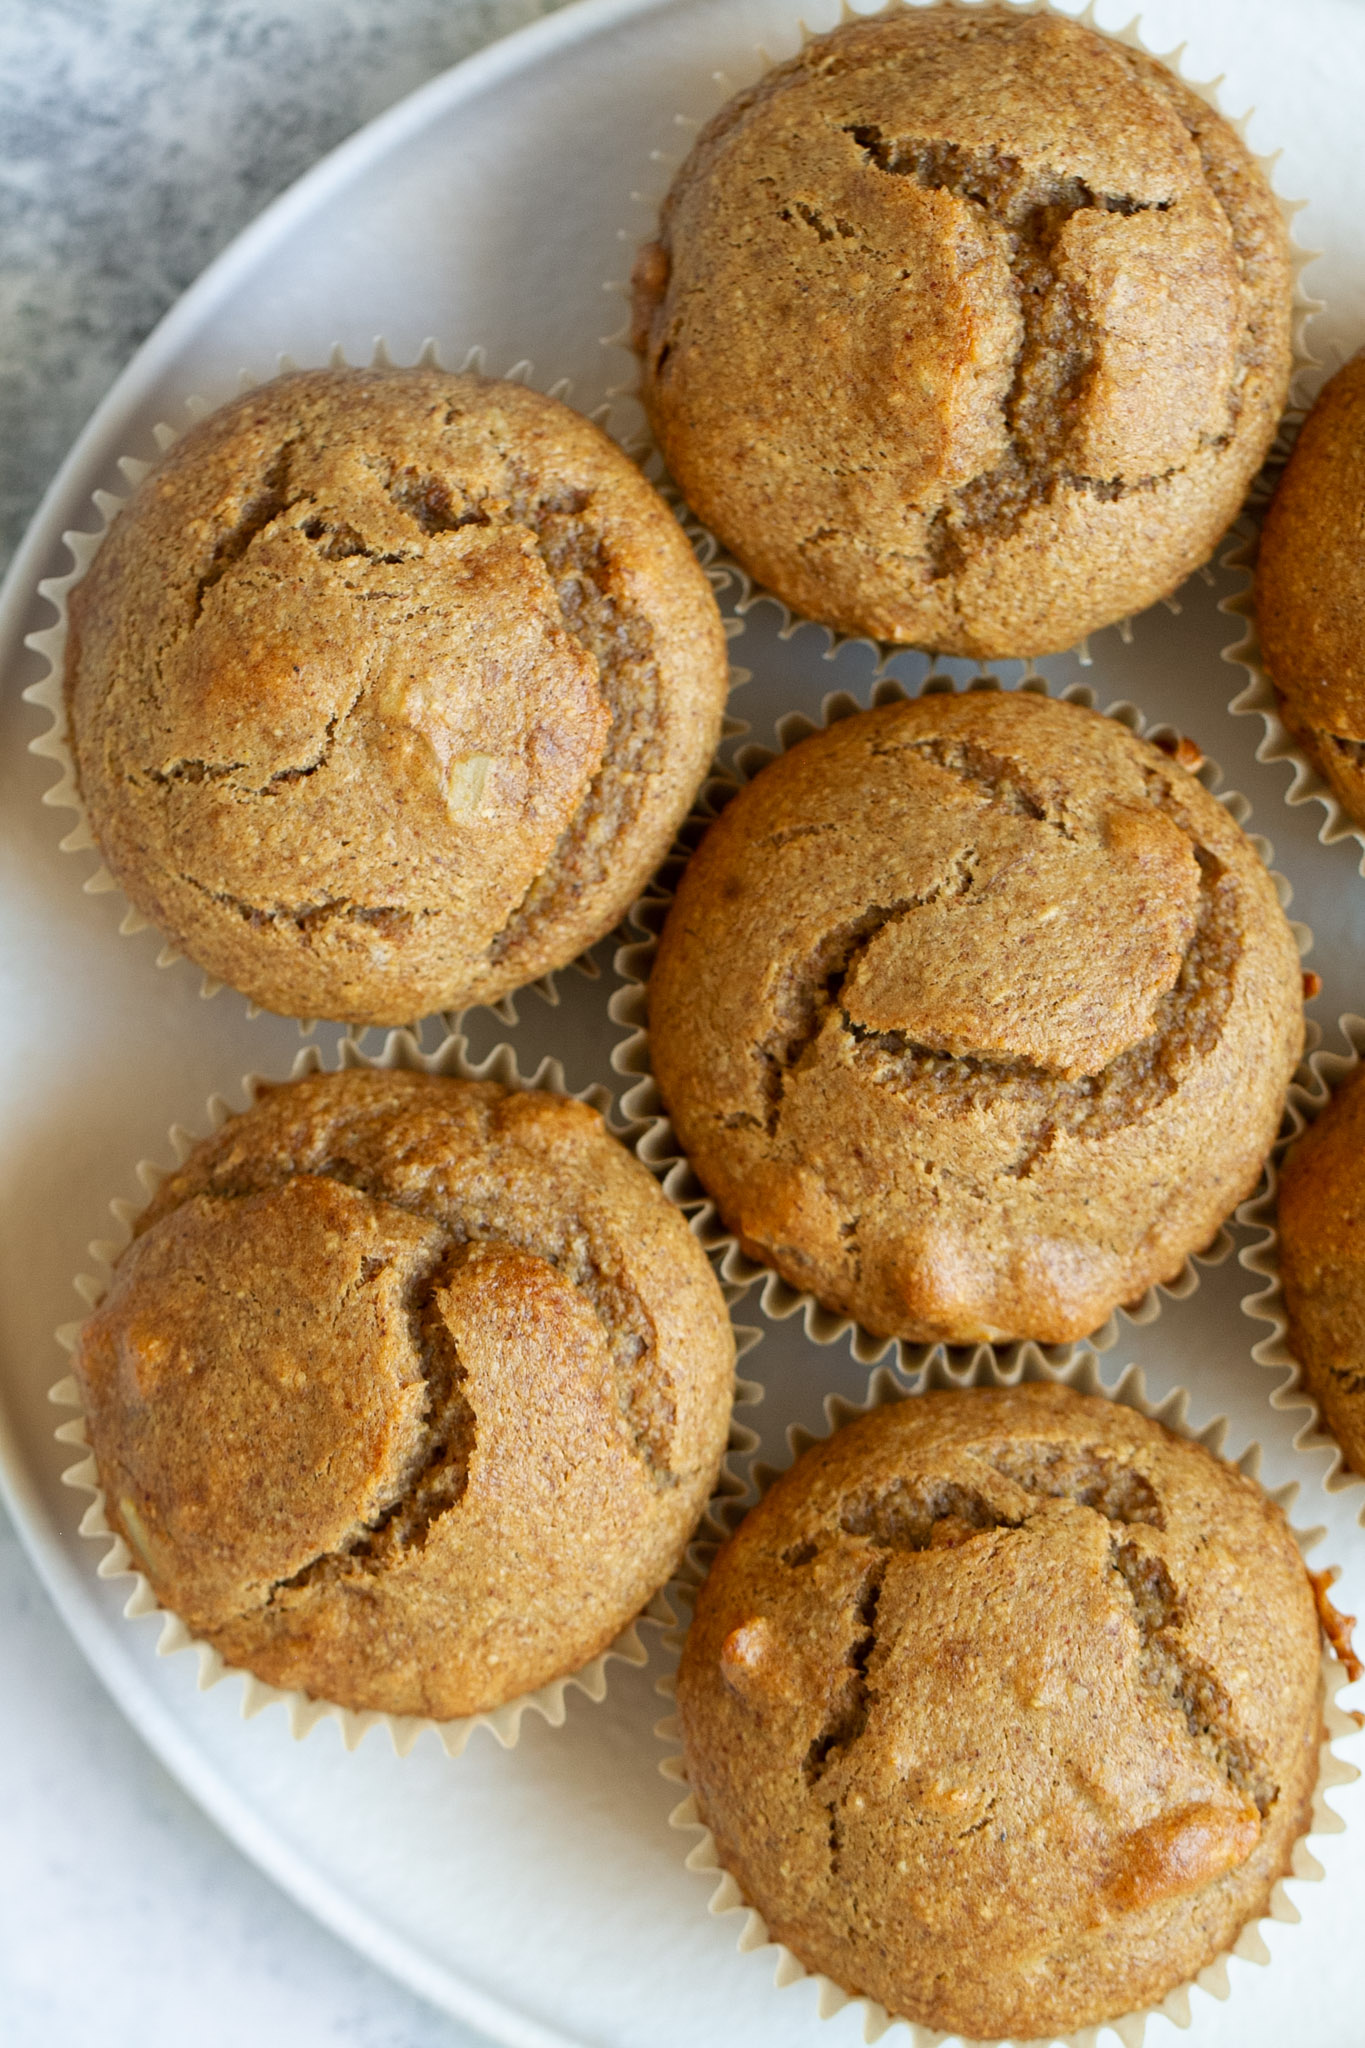 https://www.runningwithspoons.com/wp-content/uploads/2020/02/Healthy-Banana-Nut-Muffins4.jpg